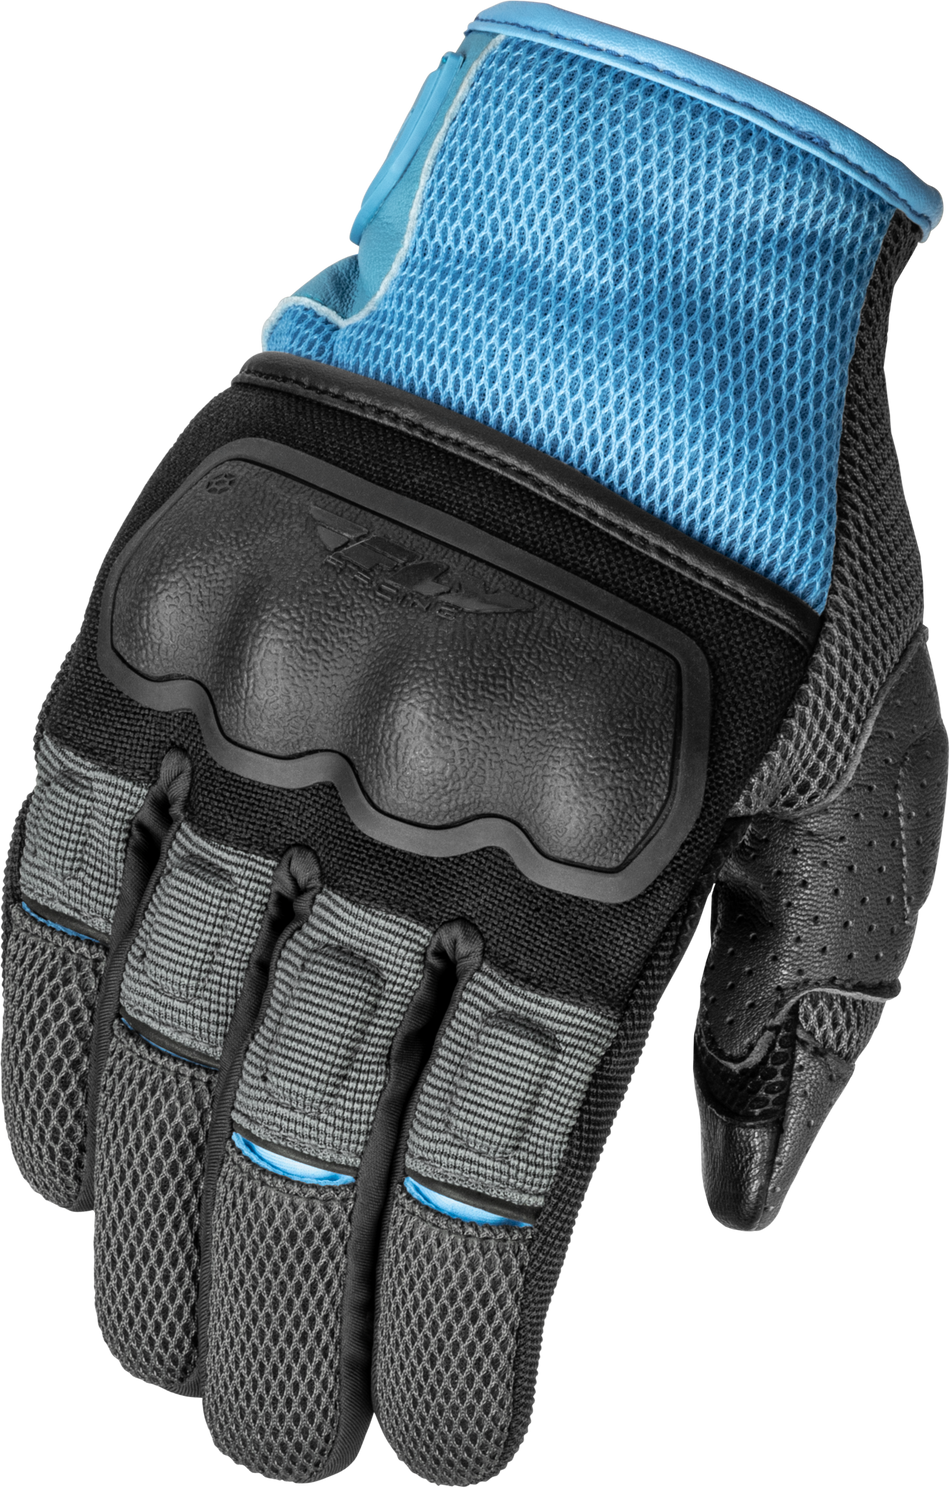 FLY RACING Women's Coolpro Force Gloves Grey/Blue Md 476-6303M